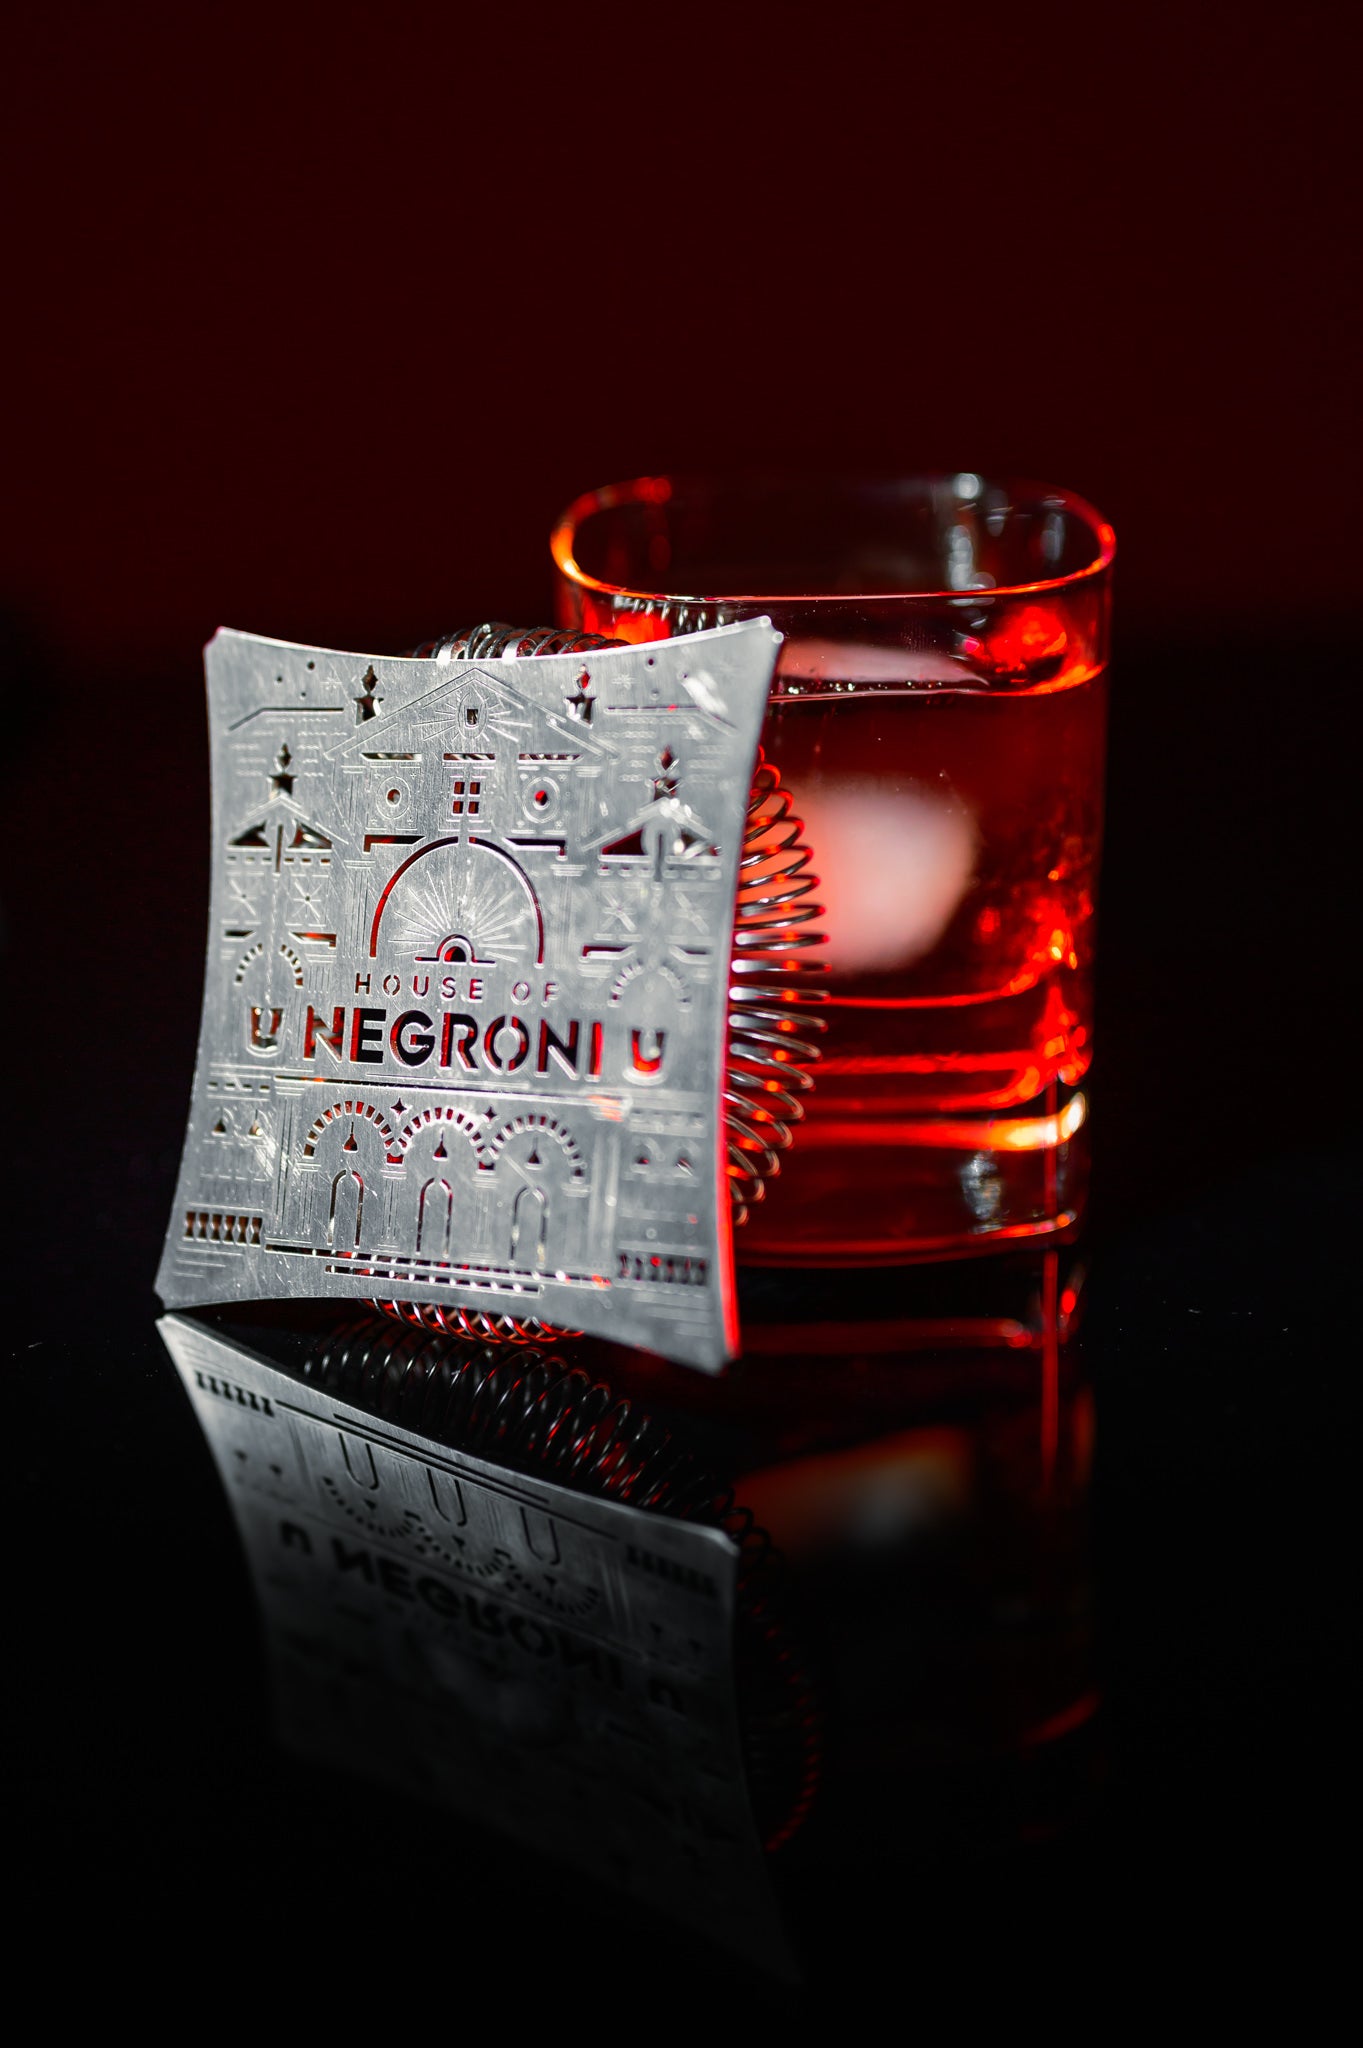 HON - House of Negroni / Official strainers